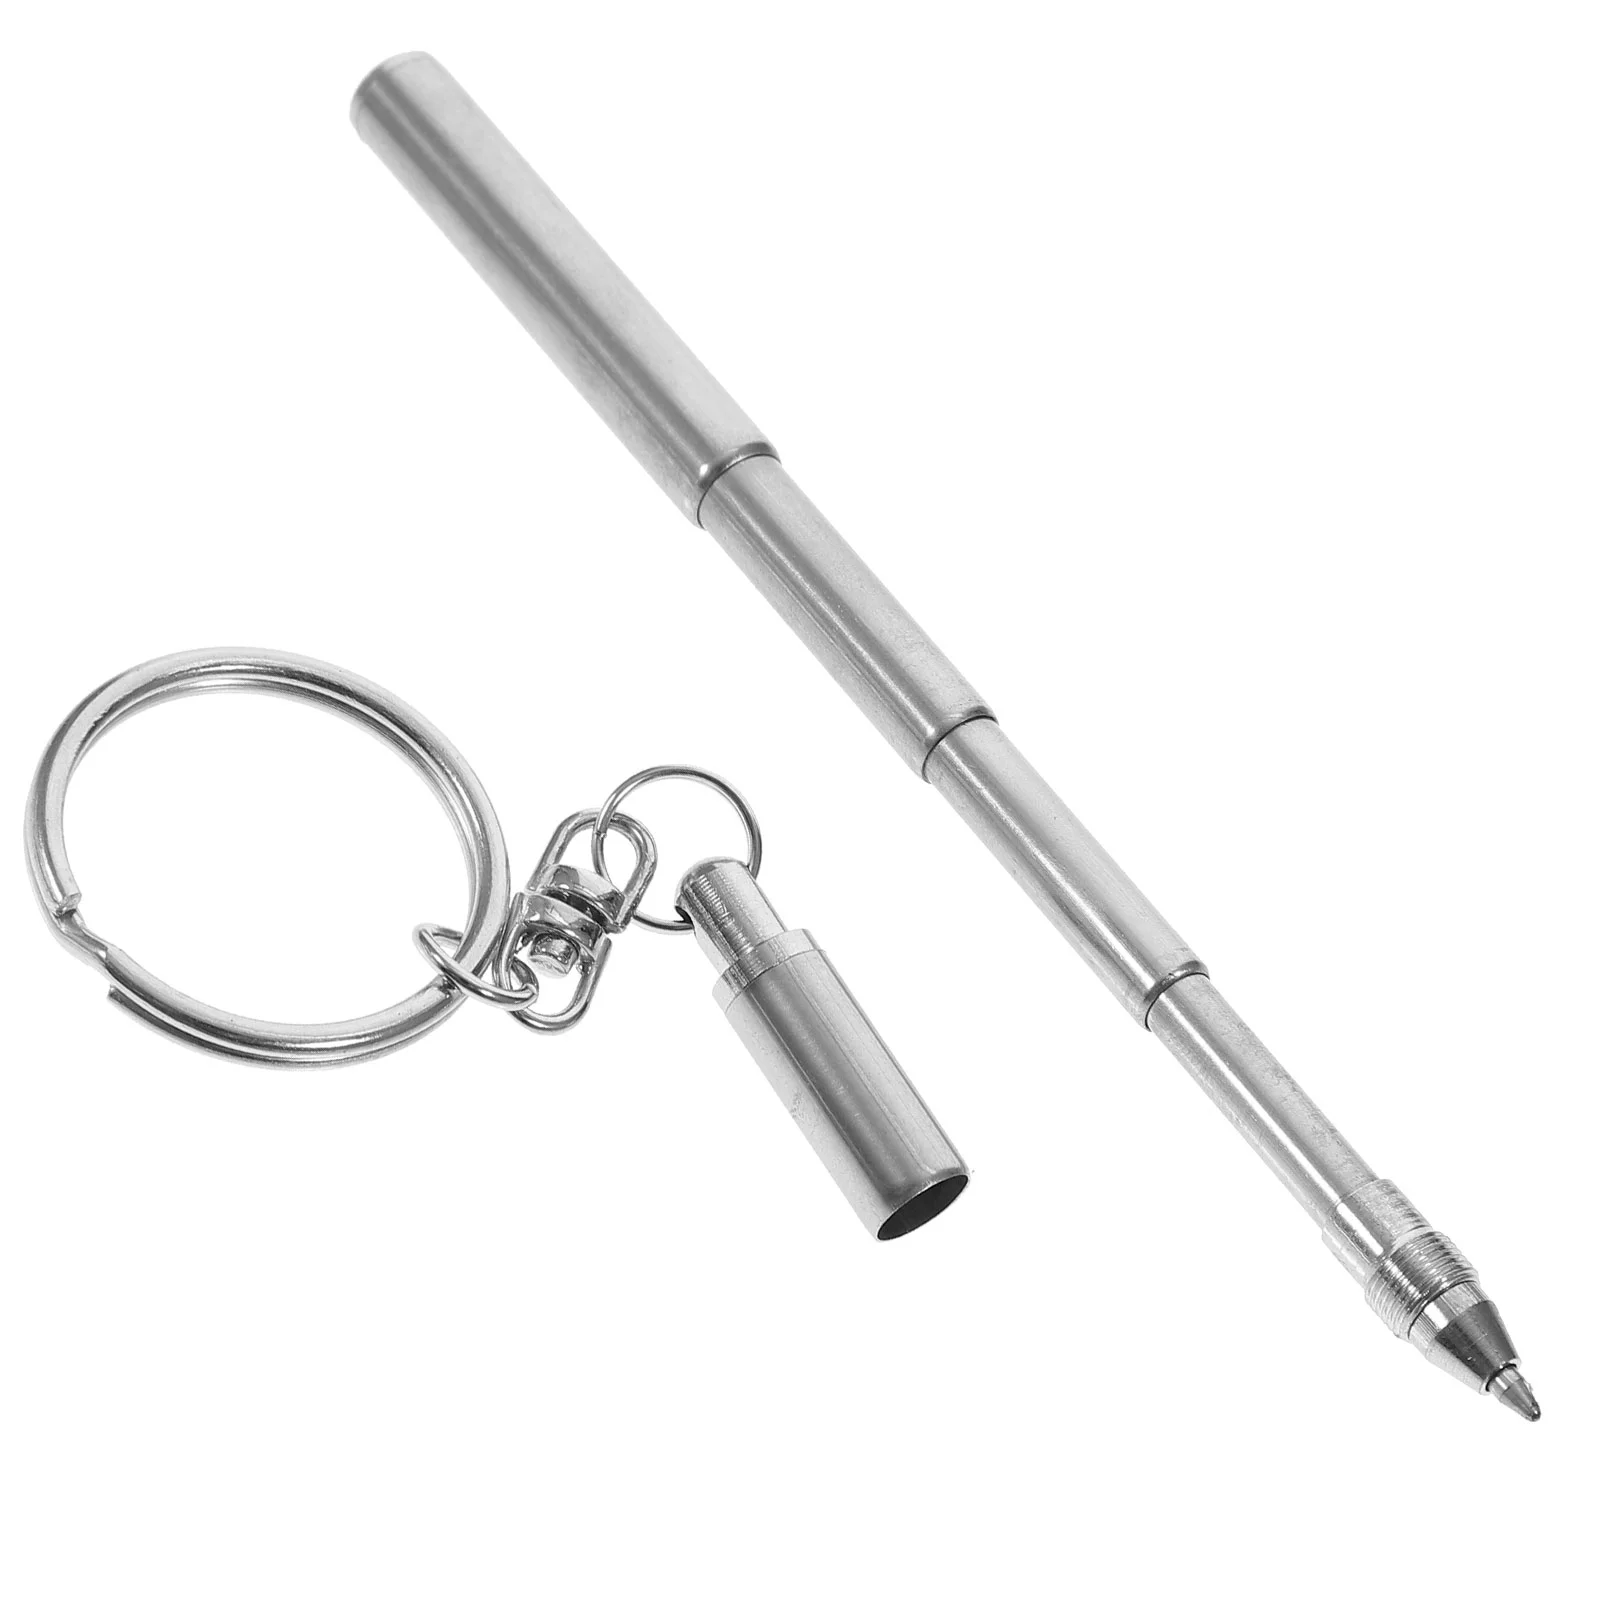 Retractable Pen Shape Keychain Mini Metal Key Ring Portable Stainless Steel Telescopic Ball Point Pens Black Keychain Tools candy color travel storage organizer jewelry case portable jewelry storage box earrings necklace ring jewelry organizer display